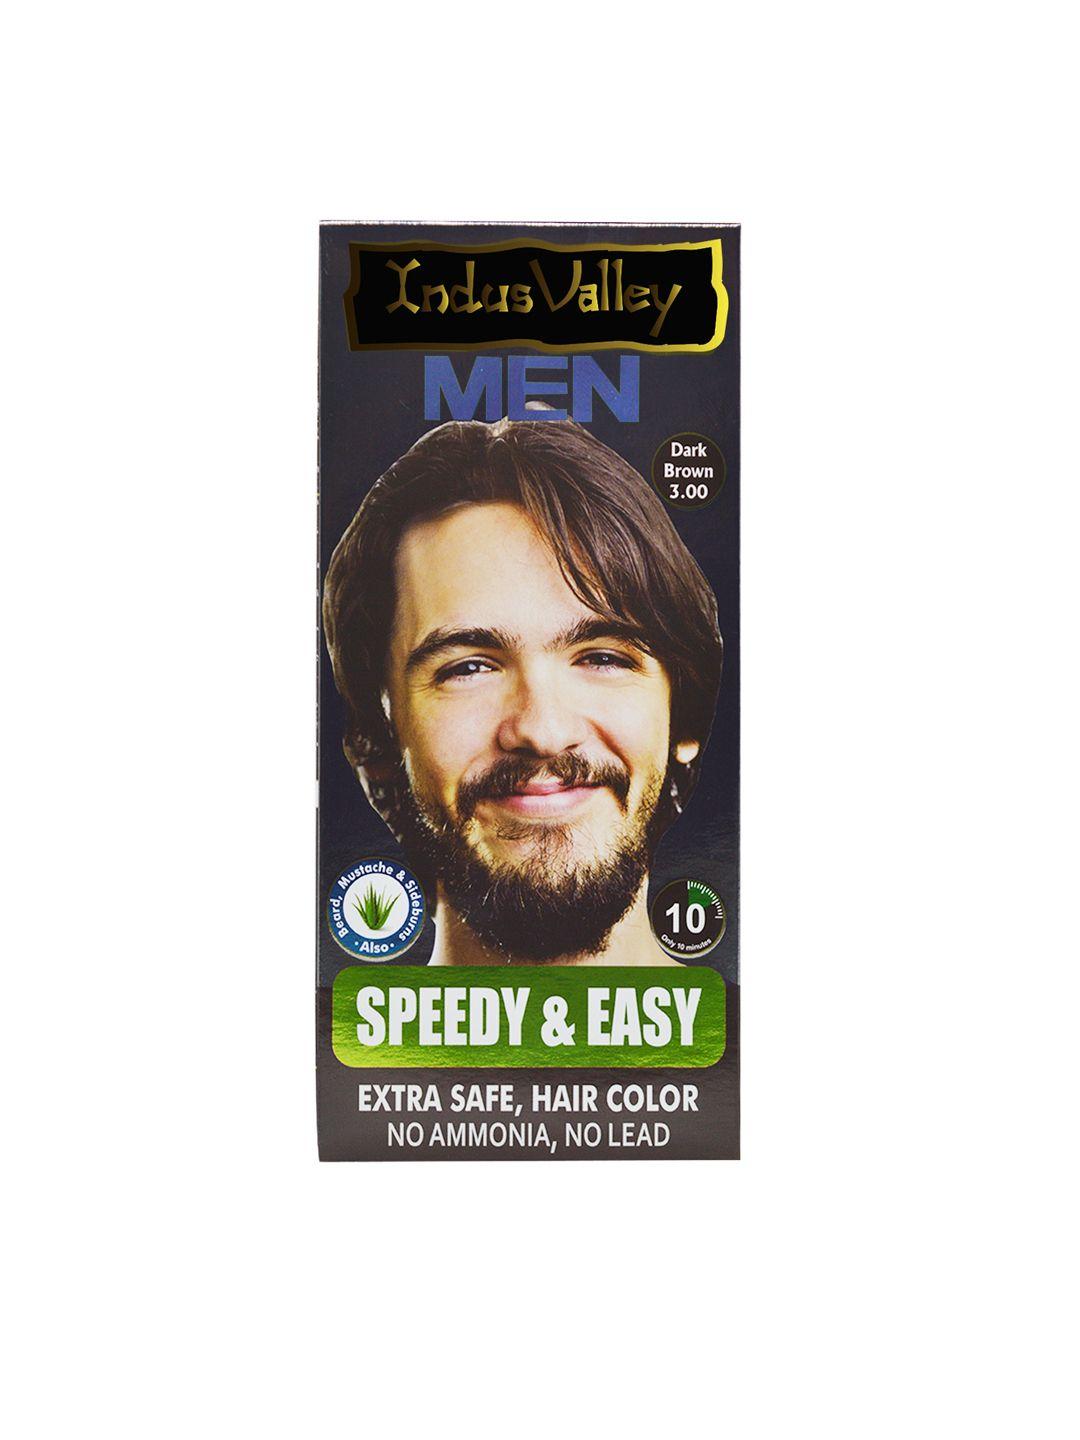 indus valley speedy and easy hair color dark brown 3.0 220 g